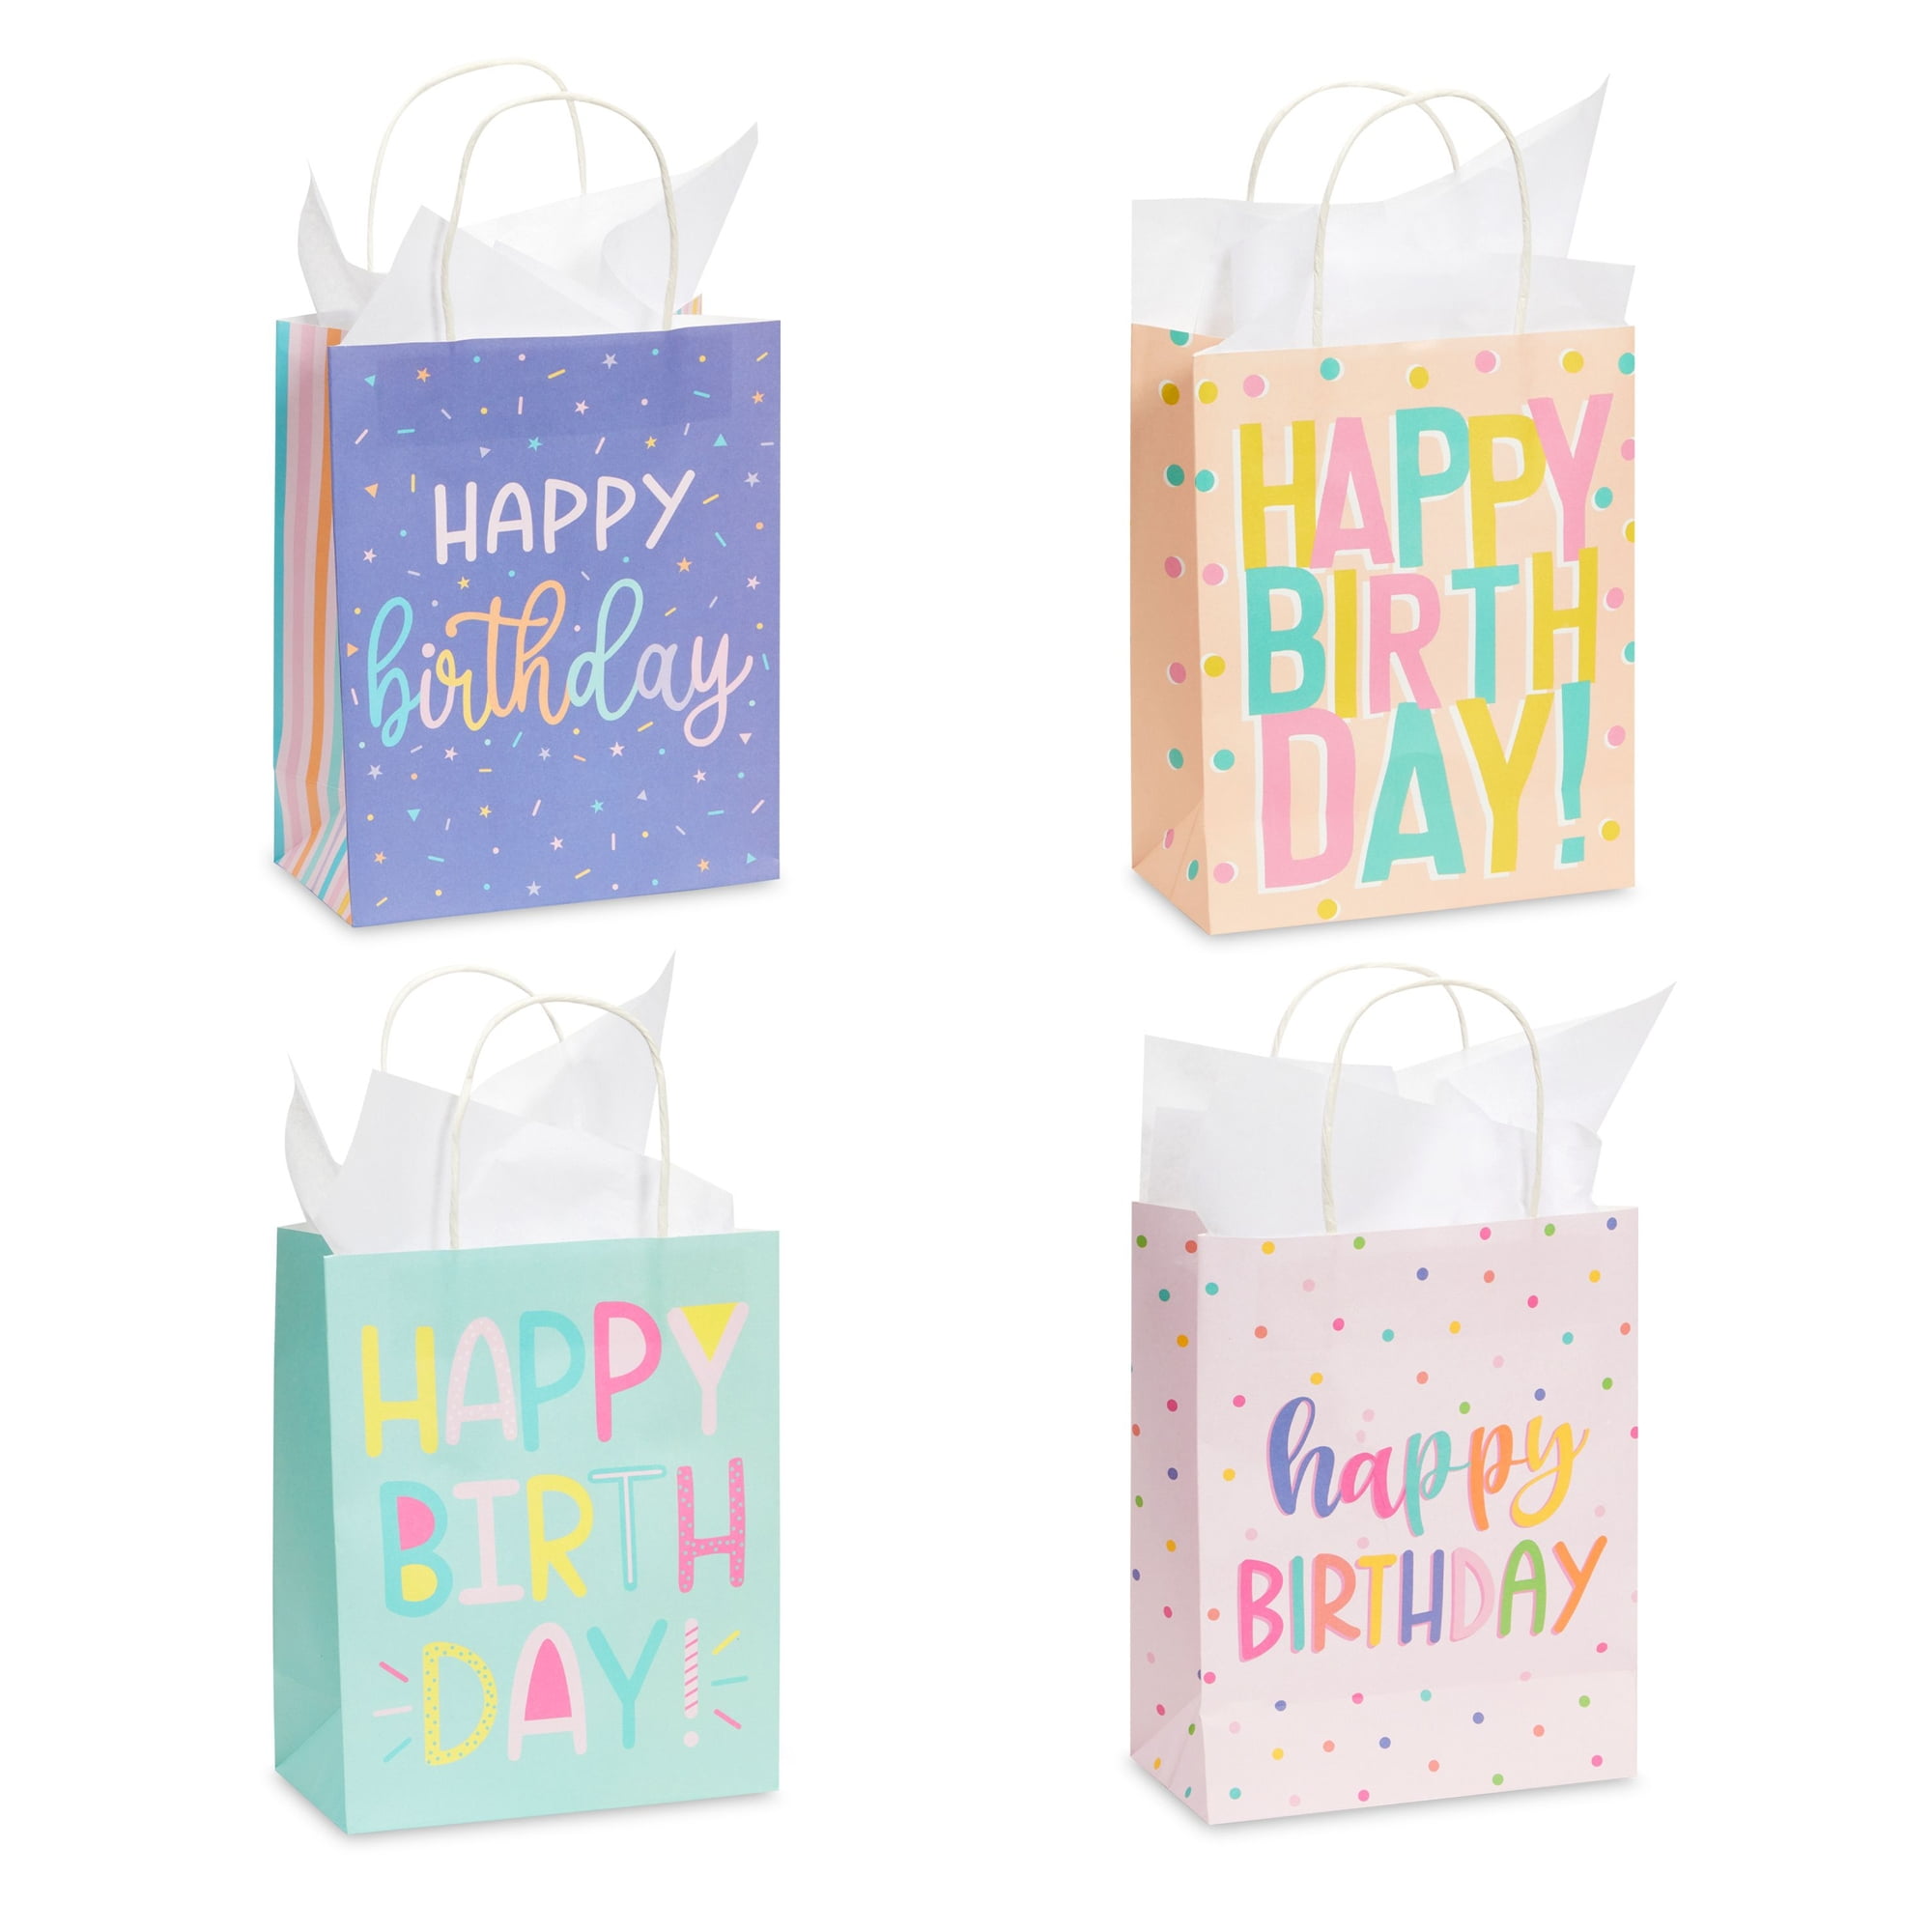 72 PC 10x13 Large Happy Birthday Party Gift Bags & Tissue Paper Kit